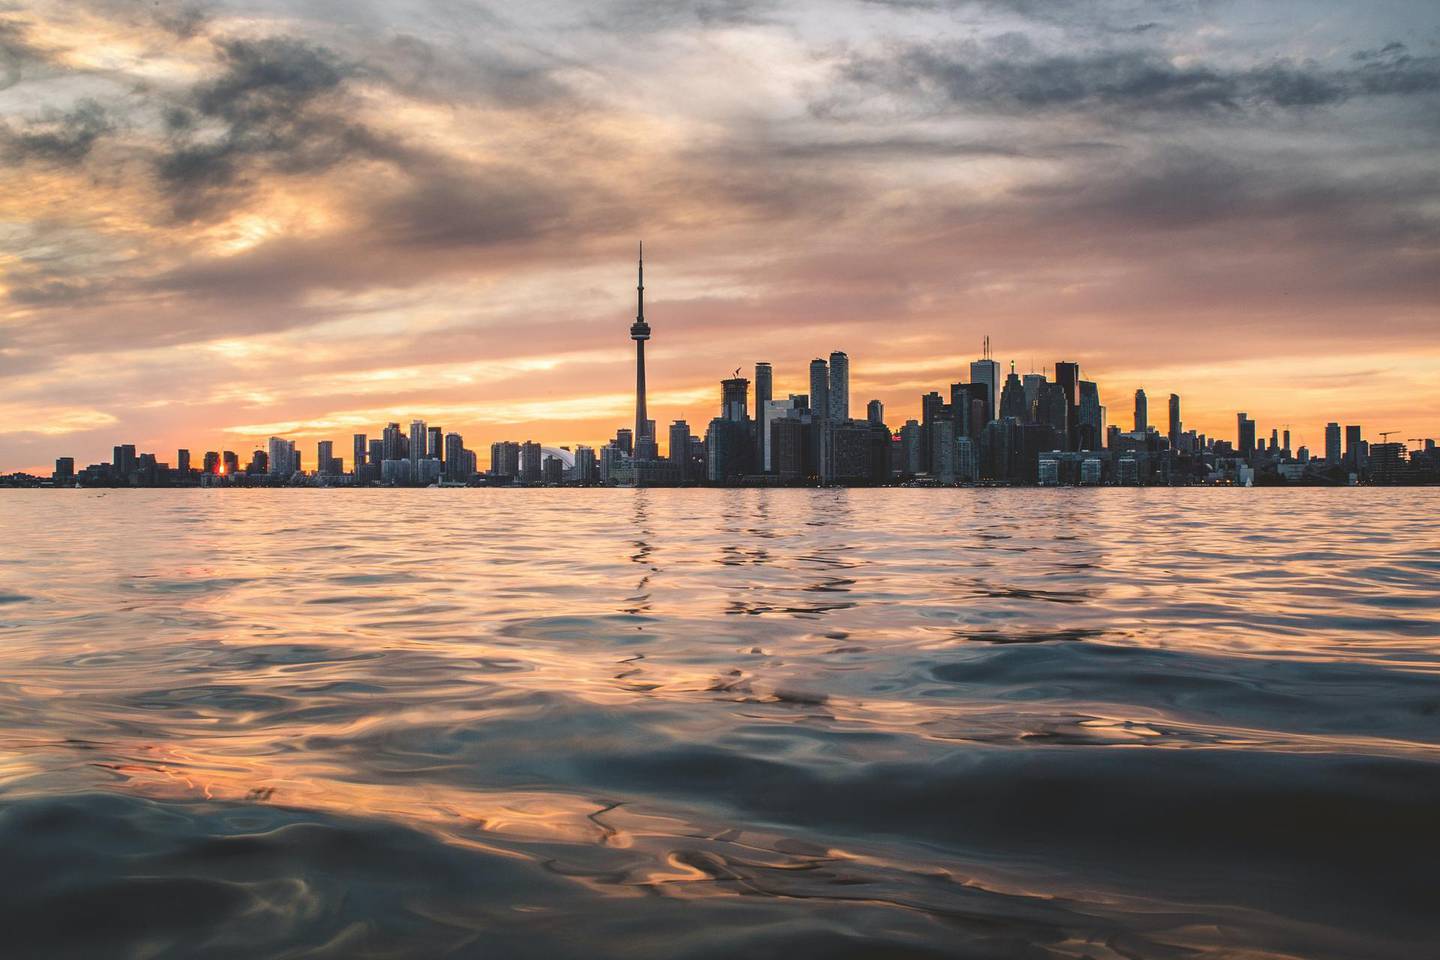 Toronto parents spend on average more than 1,700 Canadian dollars per month on childcare. Unsplash